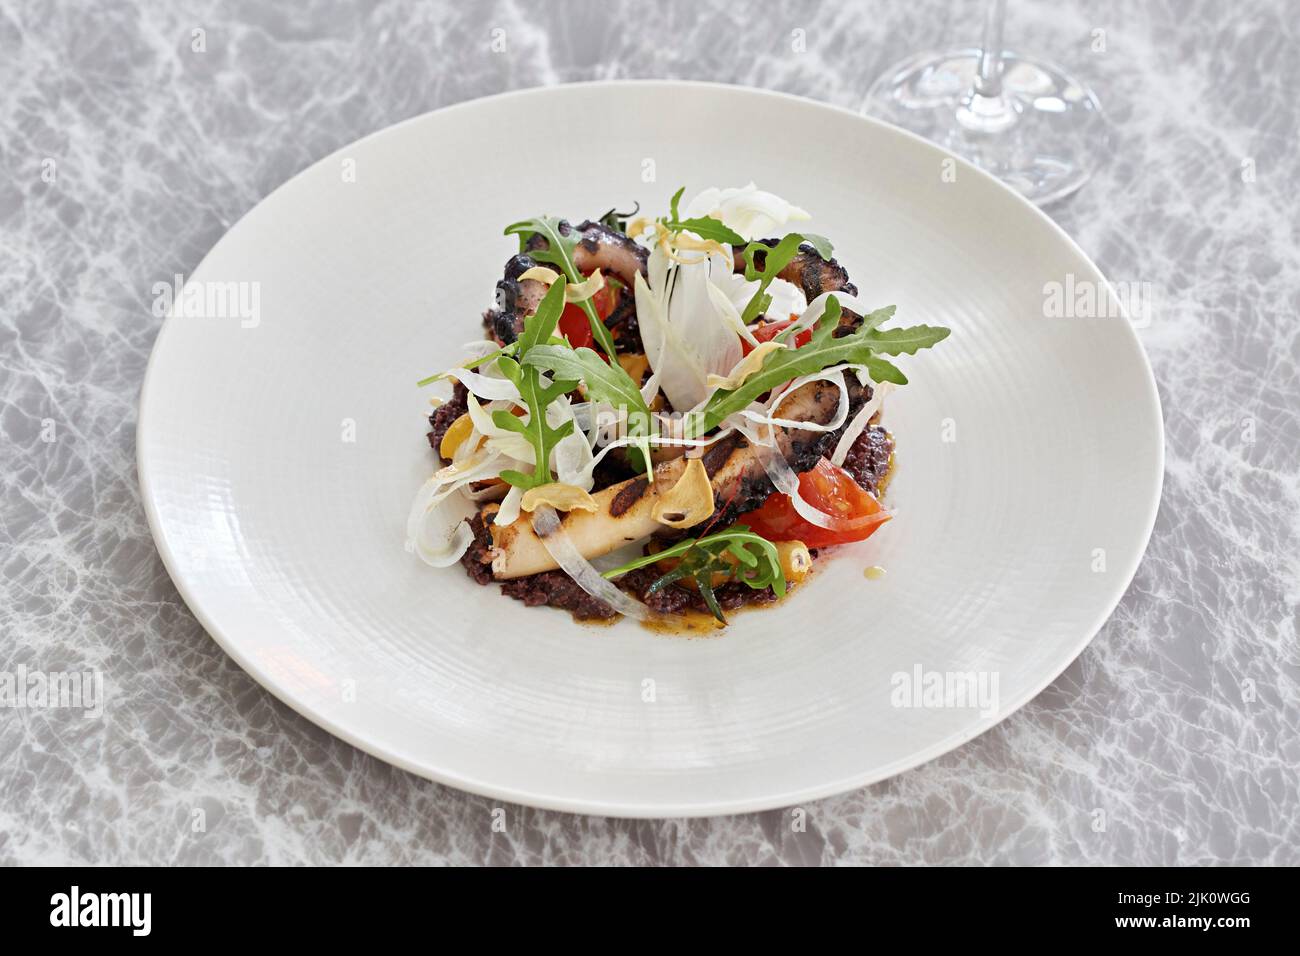 Octopus, fennel, tomato and rocket salad with fried garlic Stock Photo